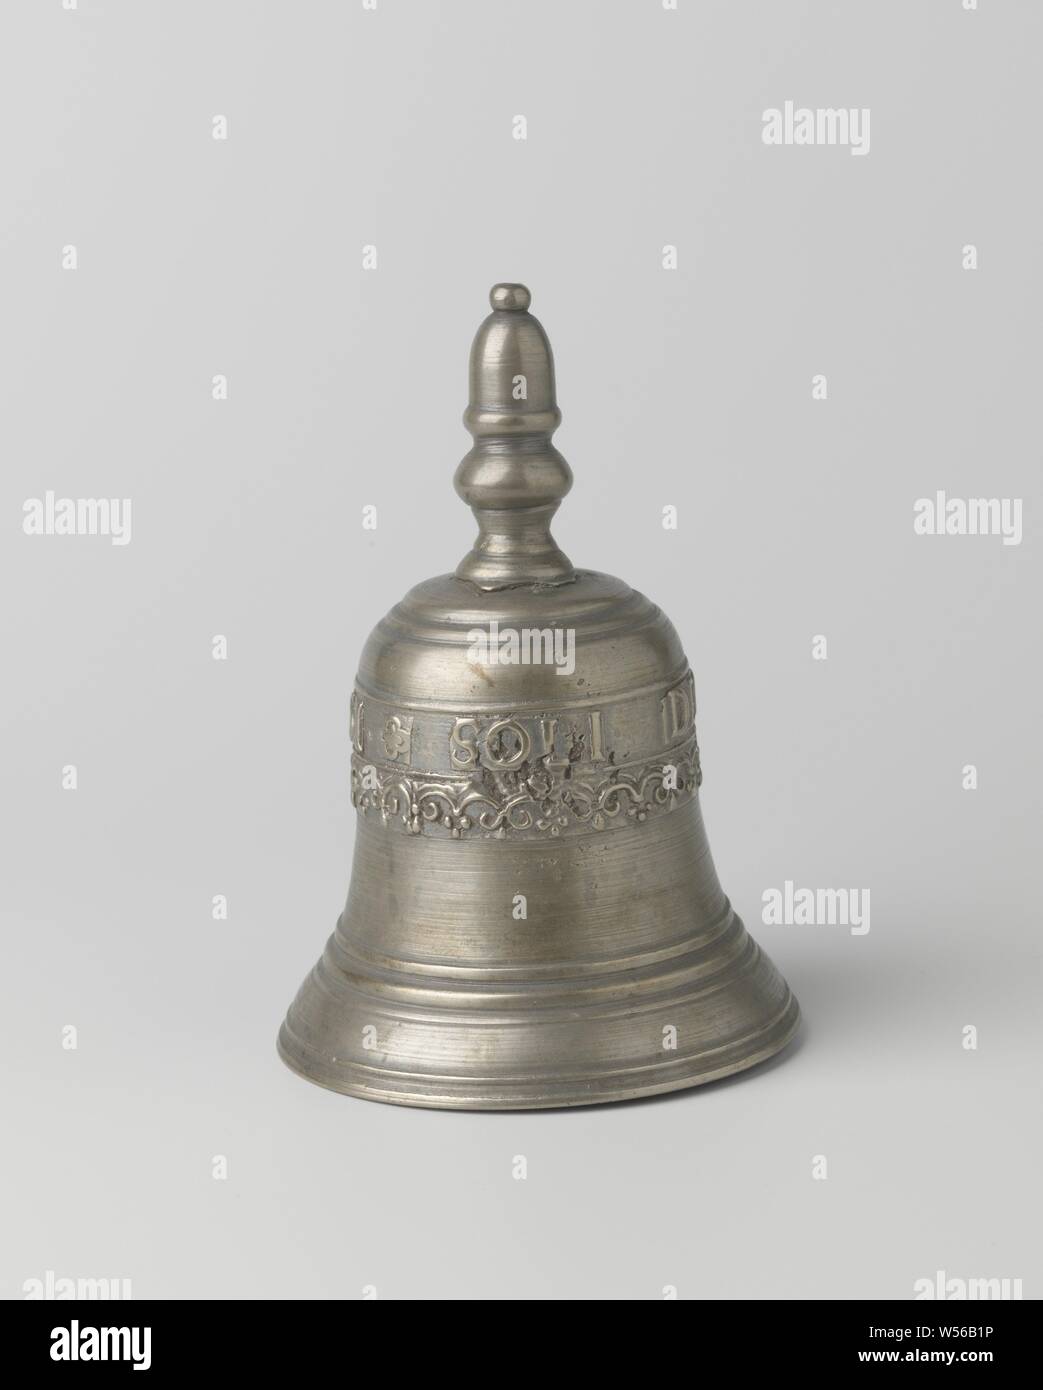 Table bell with inscription: SOLI DEO GLORIA 1661, The object is composed of four parts: the bronze bell and the bronze handle embossed on it, the iron ear and the wrought iron clapper. The bell is bell-shaped and has a profiled edge. At the top the inscription SOLI DEO GLORIA 1661 and a frieze of bows. The handle is button-shaped with an acorn on top., anonymous, Netherlands, 1661, bronze (metal), iron (metal), founding, h 14.7 cm × d 10.2 cm Stock Photo